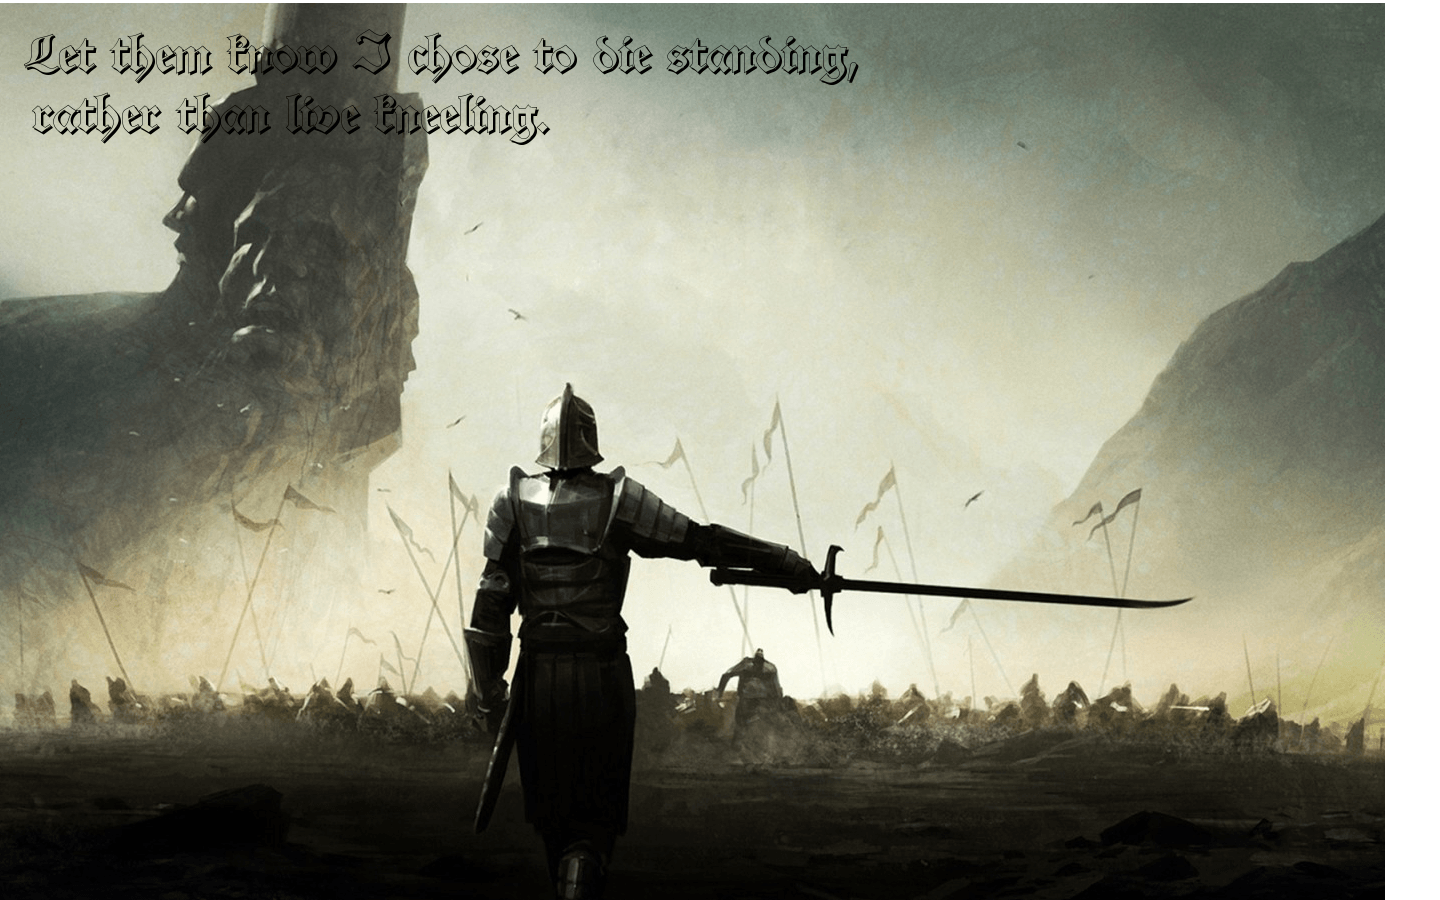 This is mine Quote stolen from the new Sparta movie